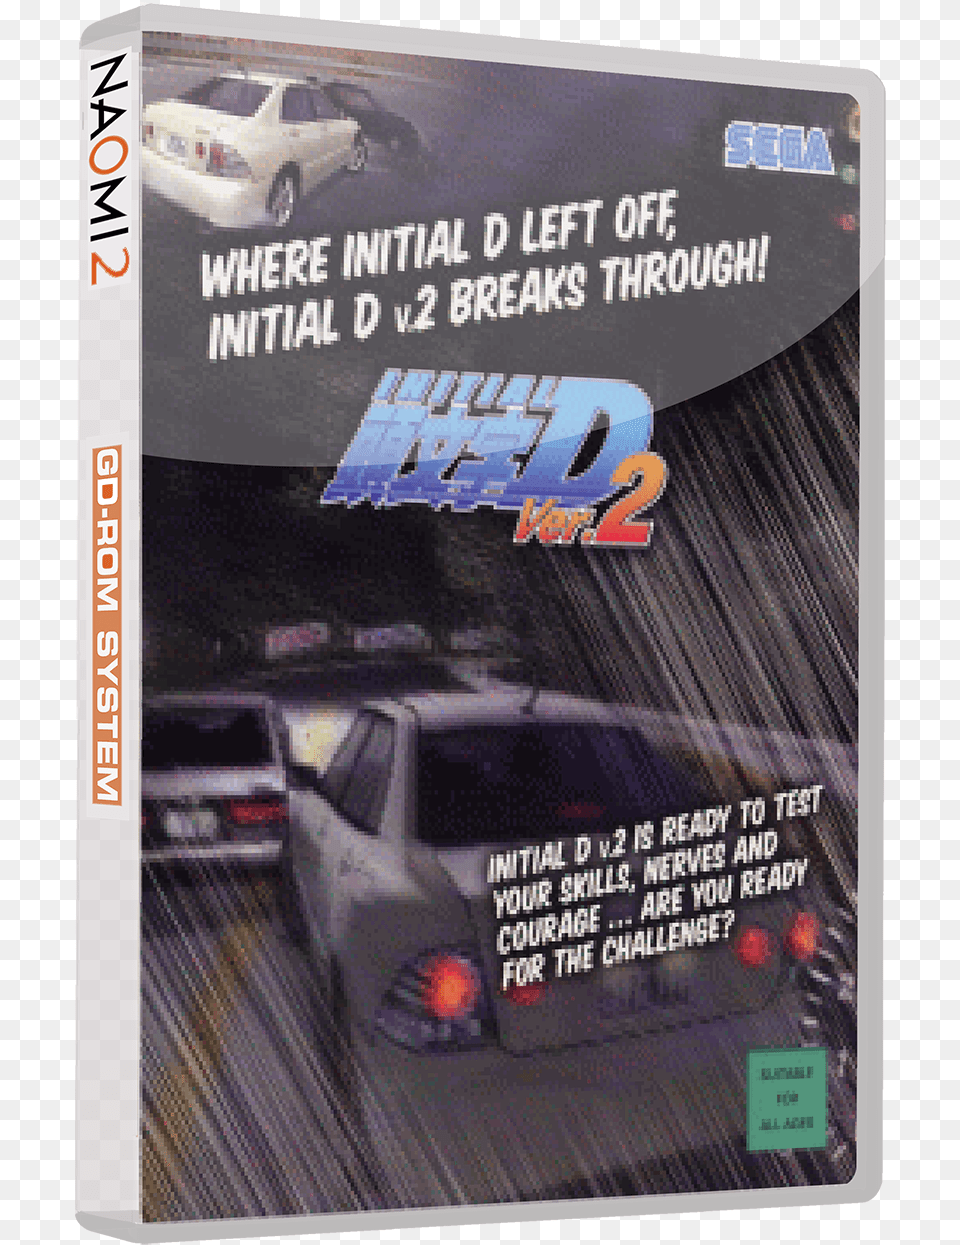 Initial D Arcade Stage Zero Disc, License Plate, Transportation, Vehicle, Advertisement Png Image